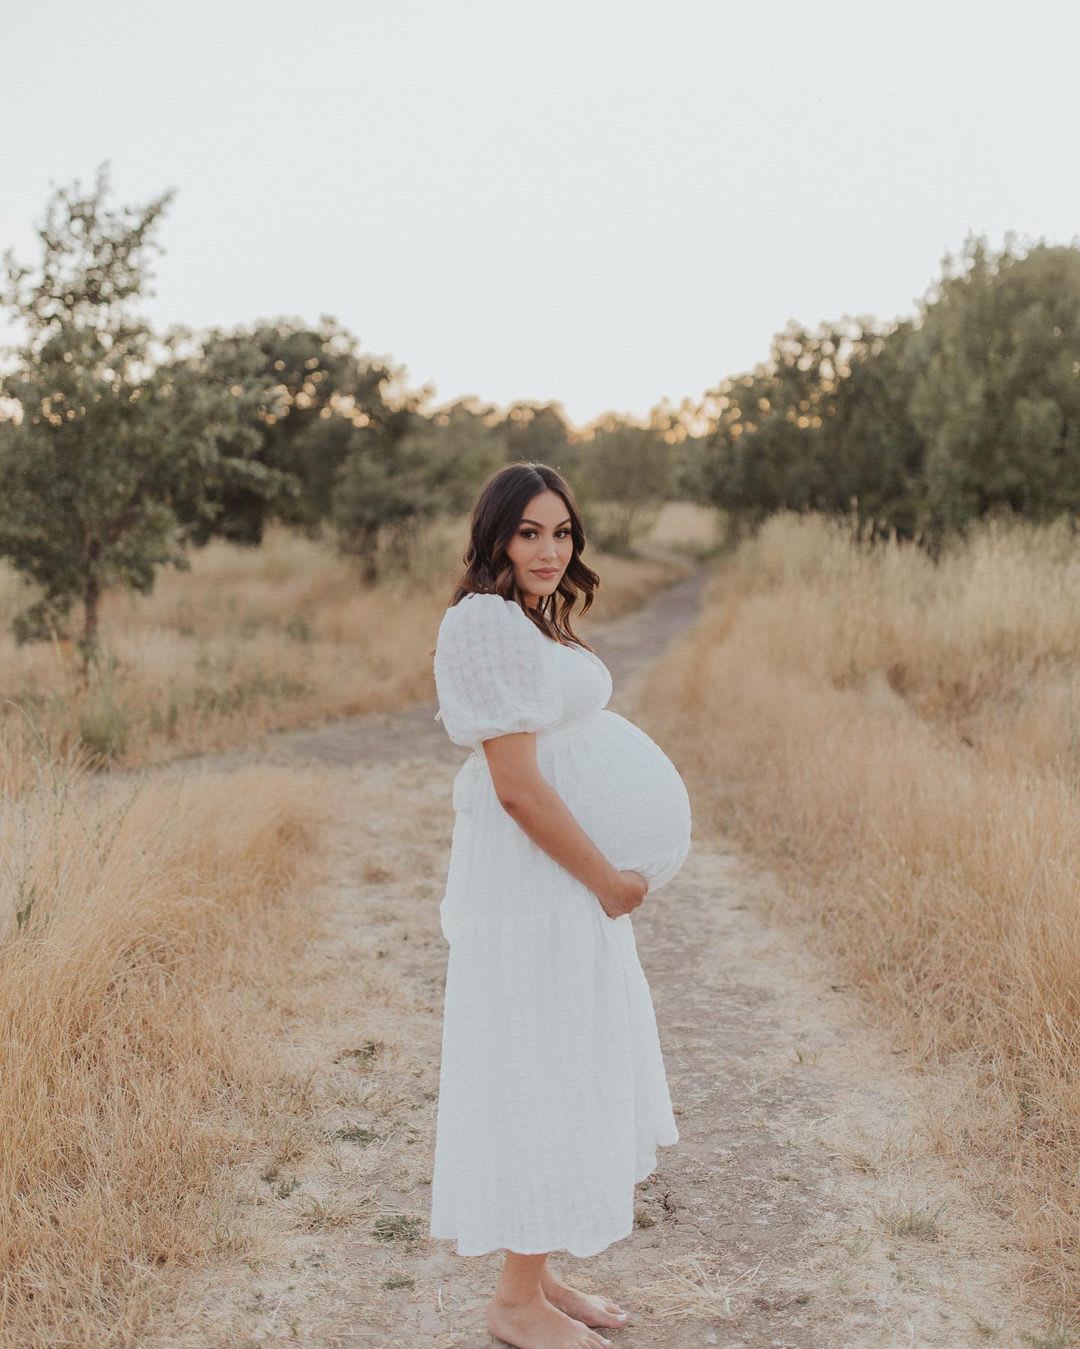 18 Cute Pregnancy Outfits 2019 — Best Maternity Fashion to Shop